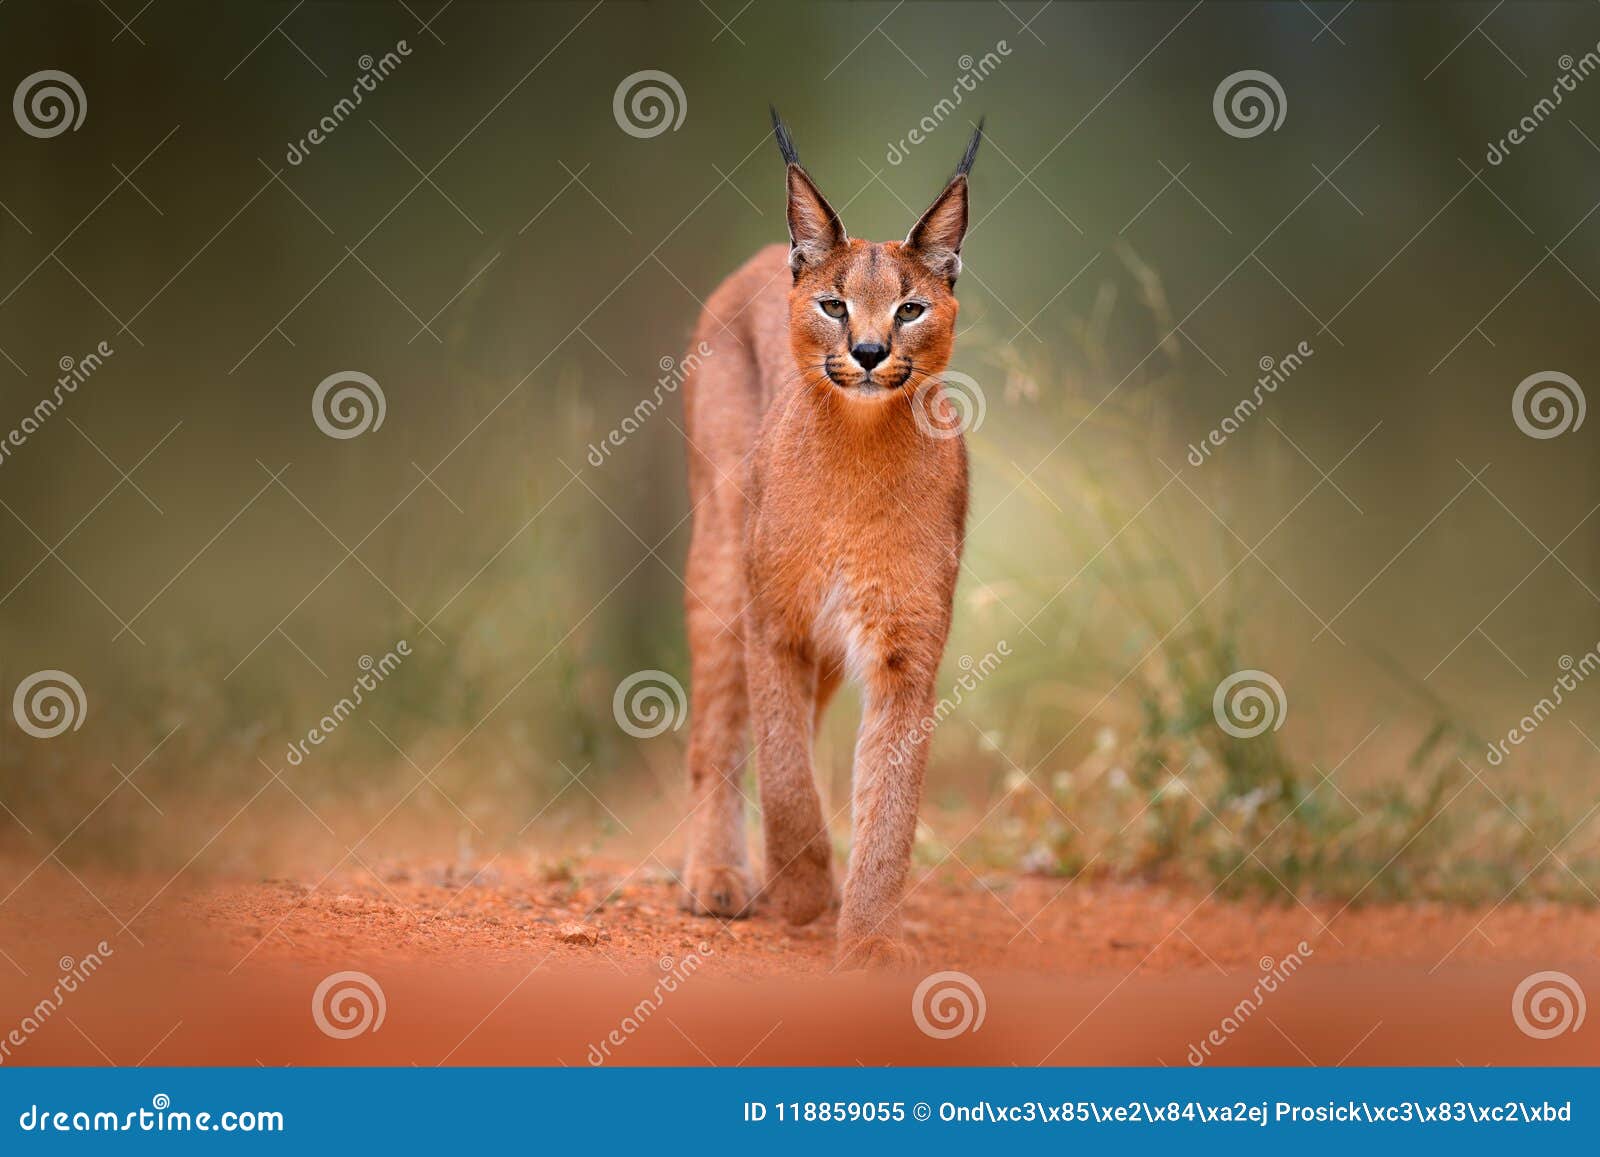 caracal, african lynx, in green grass vegetation. beautiful wild cat in nature habitat, botswana, south africa. animal face to fac